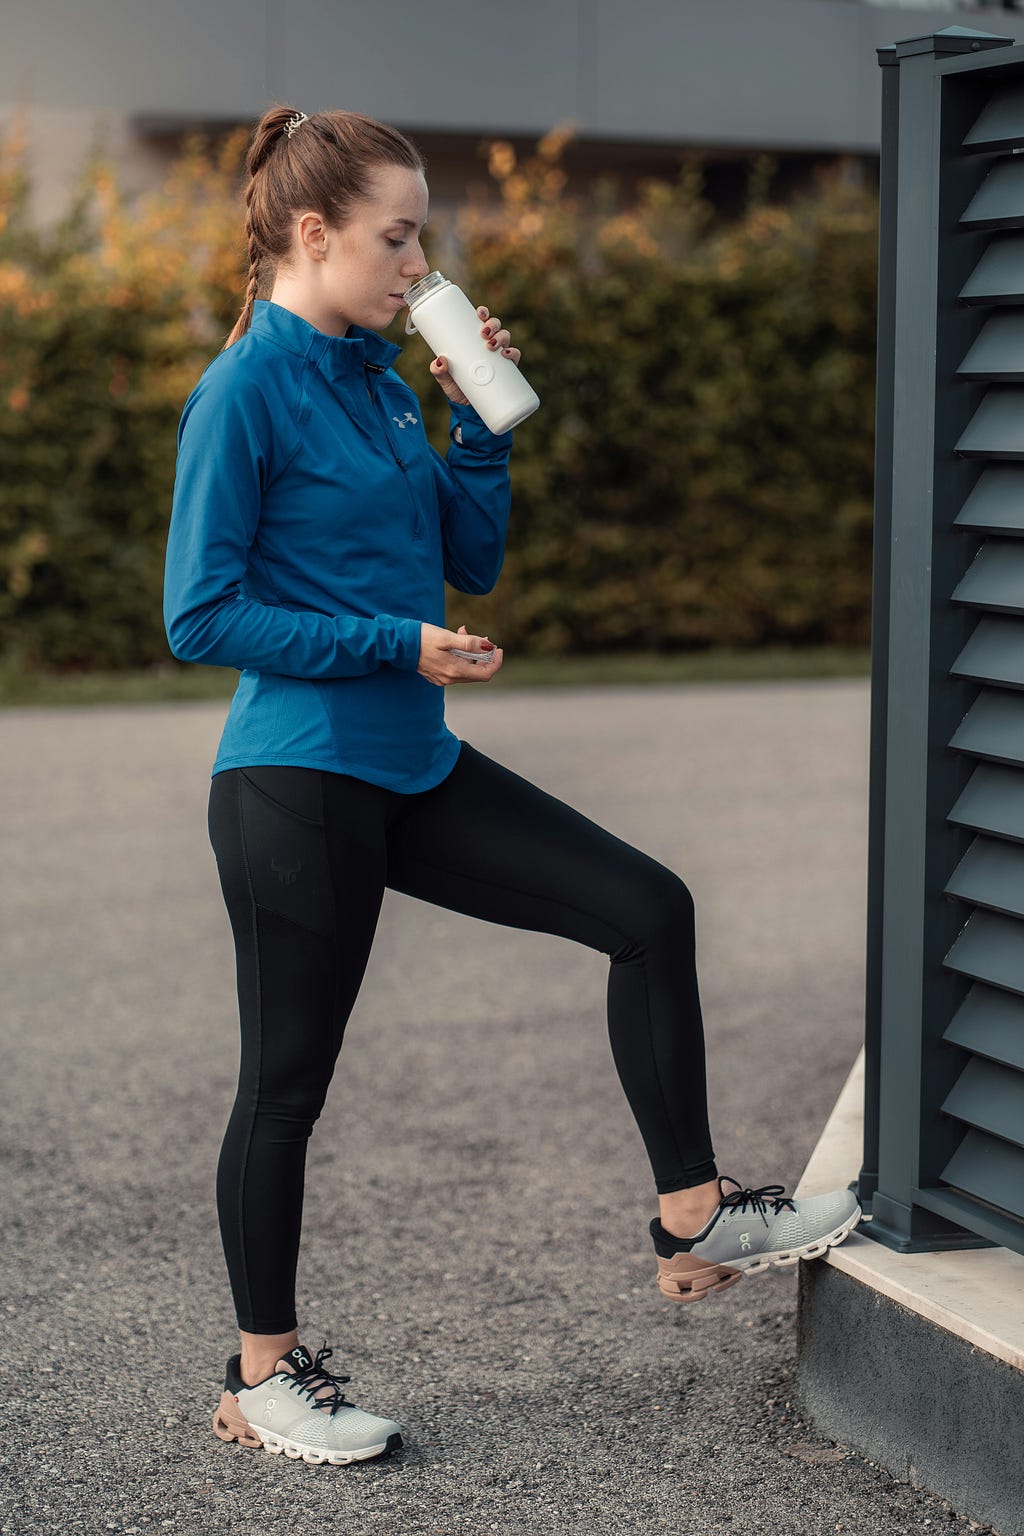 Woman out jogging stopped to sip from her water bottle